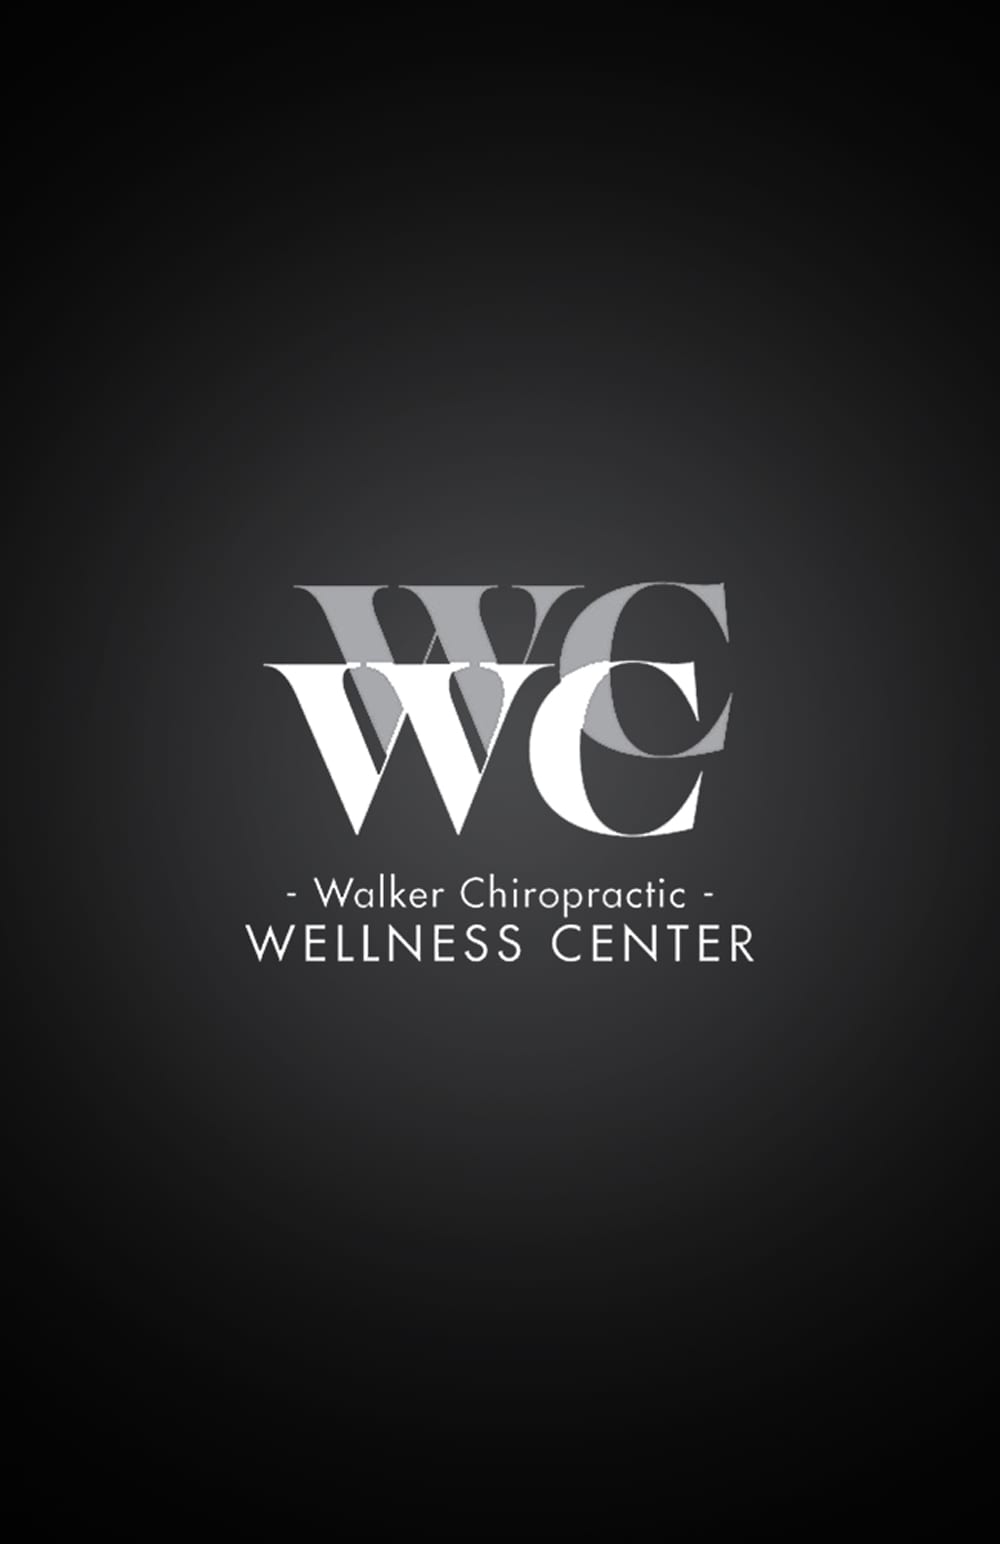 synergy chiropractic wellness clinic